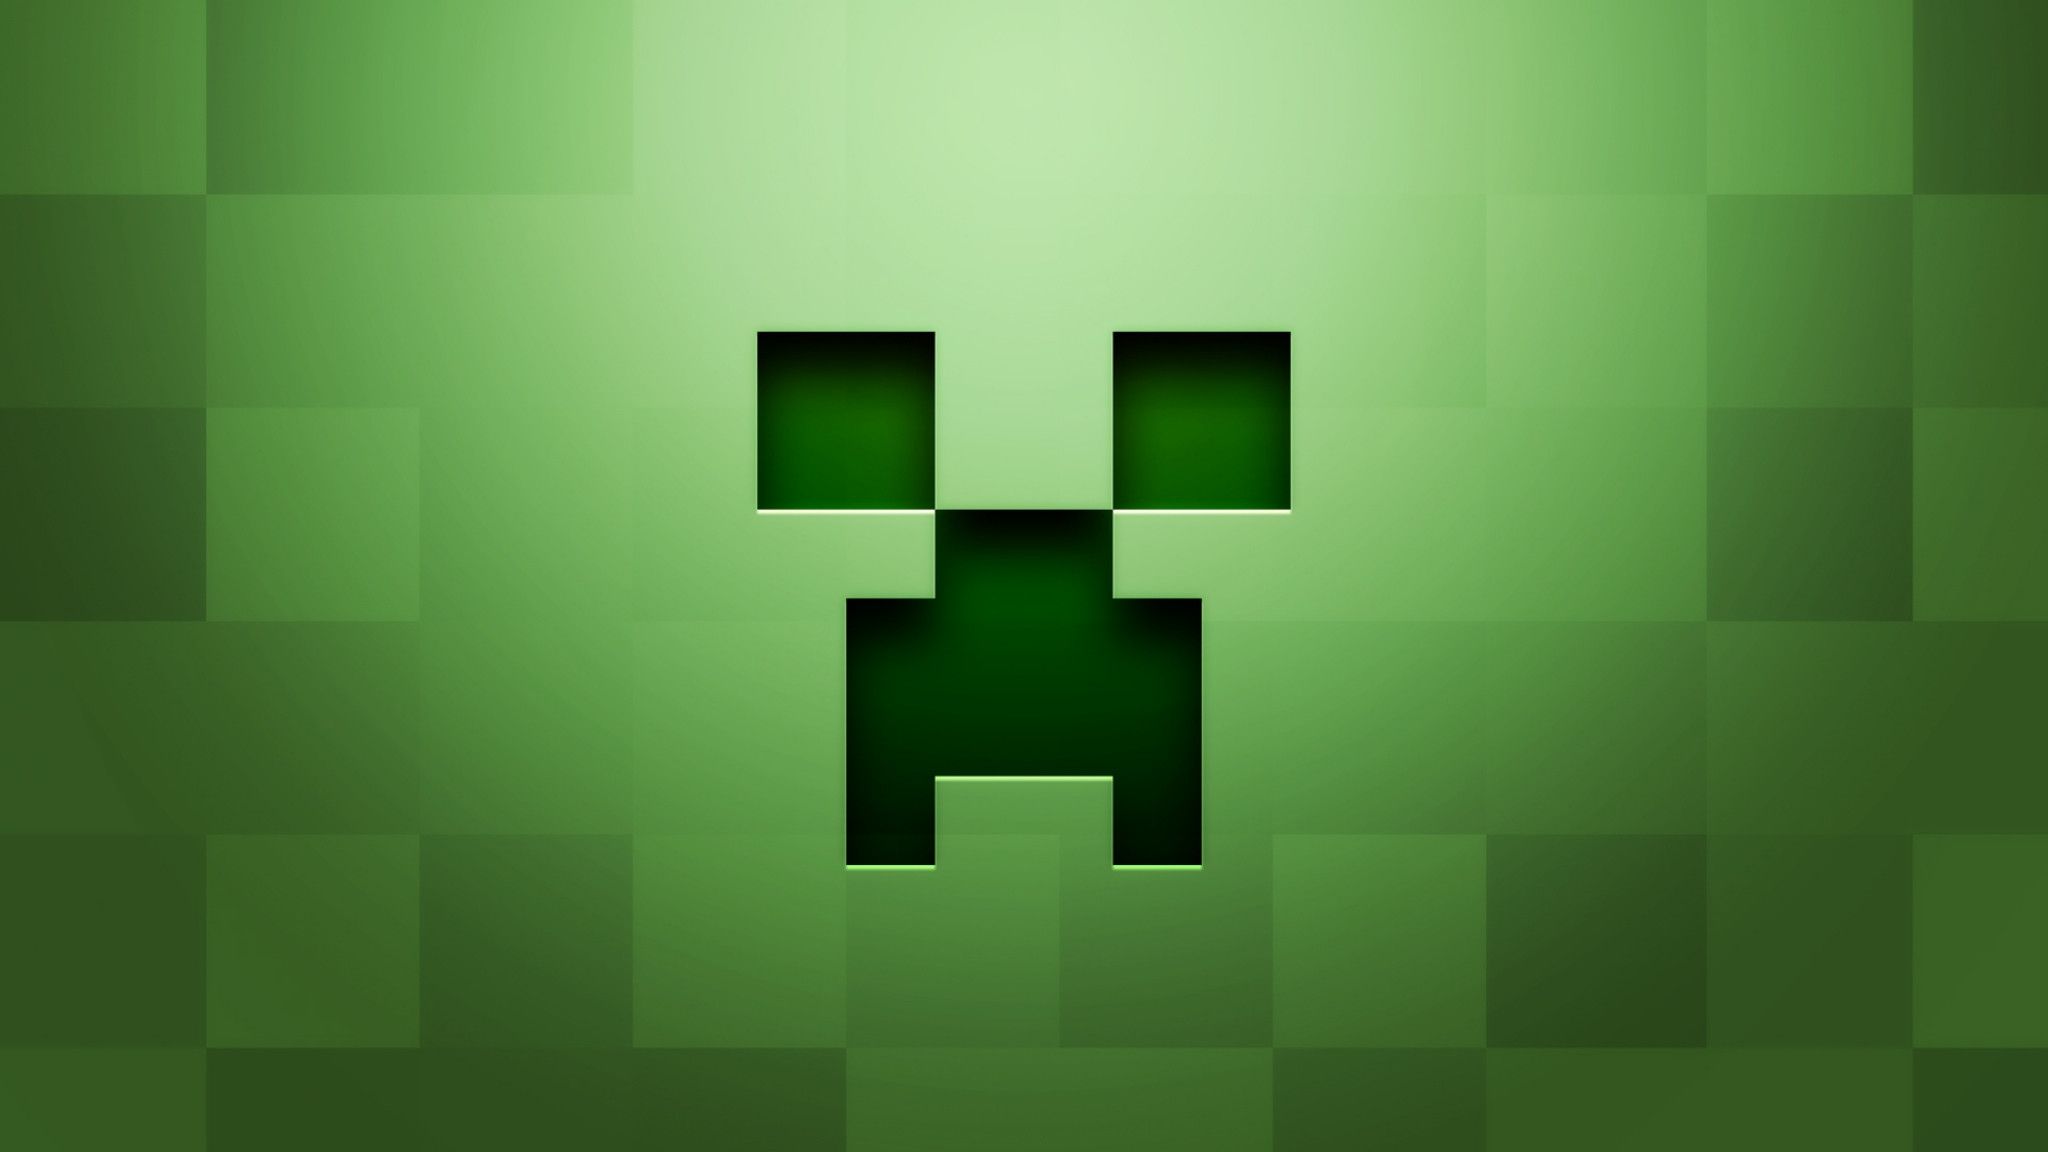 youtube channel art minecraft 2048 pixels wide and 1152 pixels tall